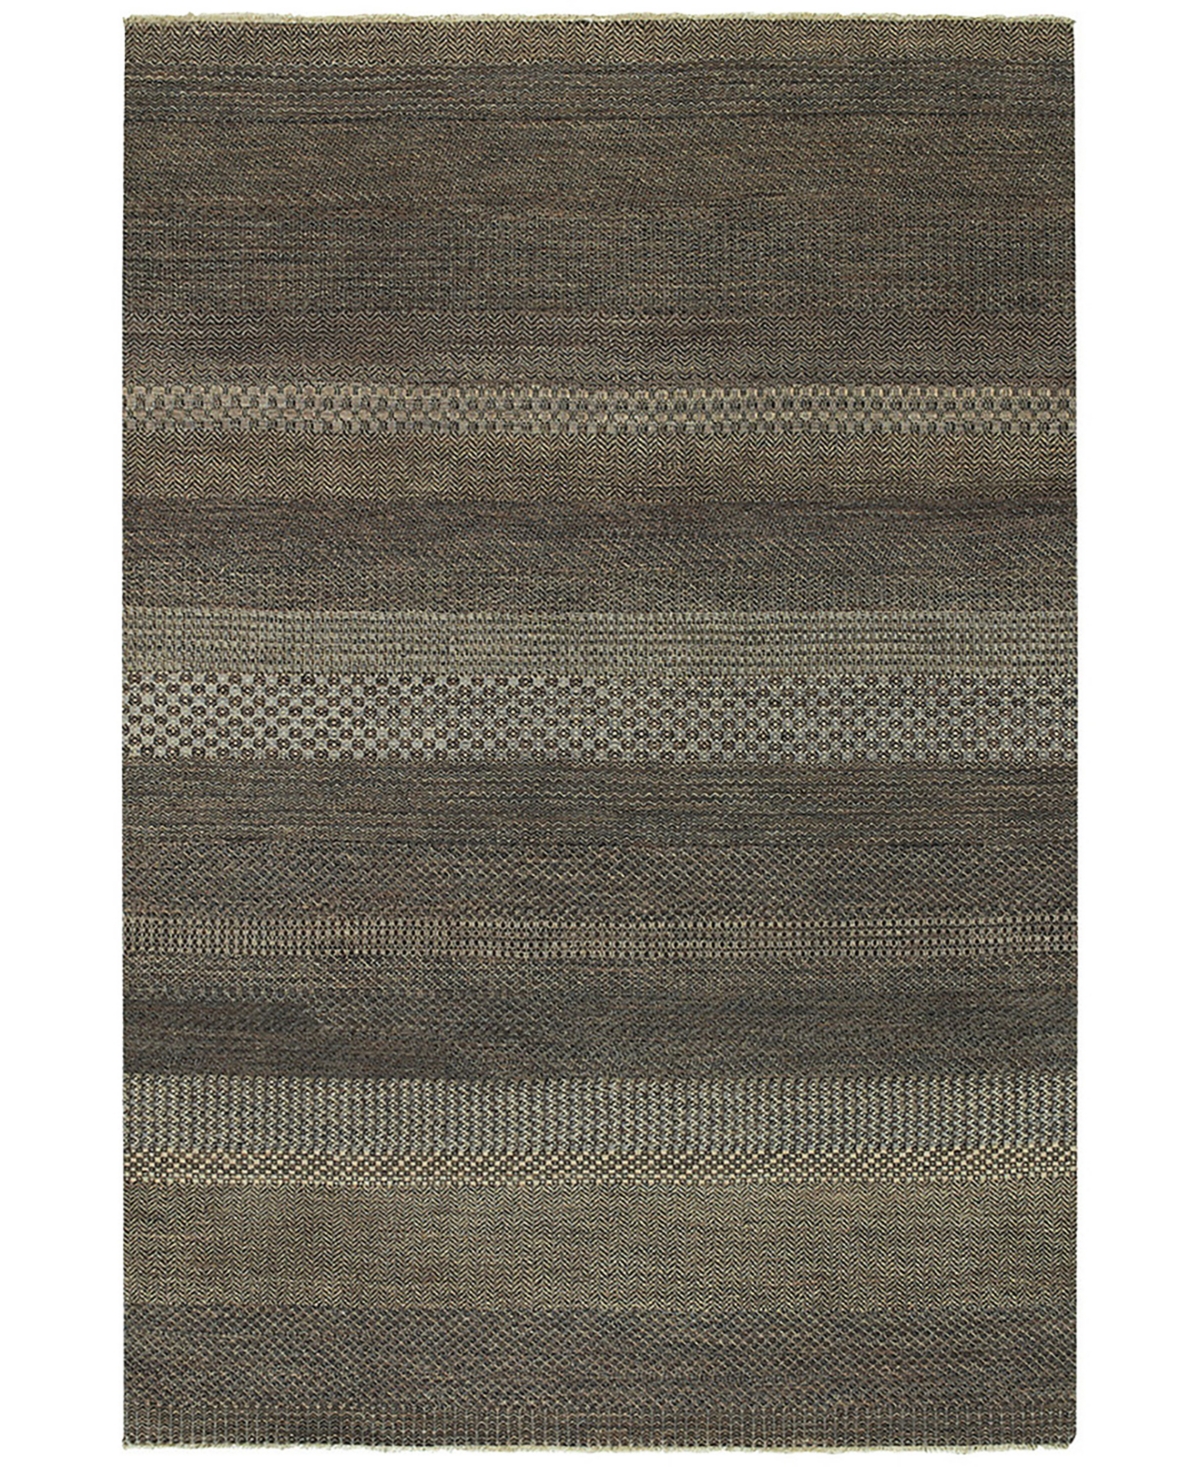 Capel Barrister 775 8' x 10' Area Rug - Brown